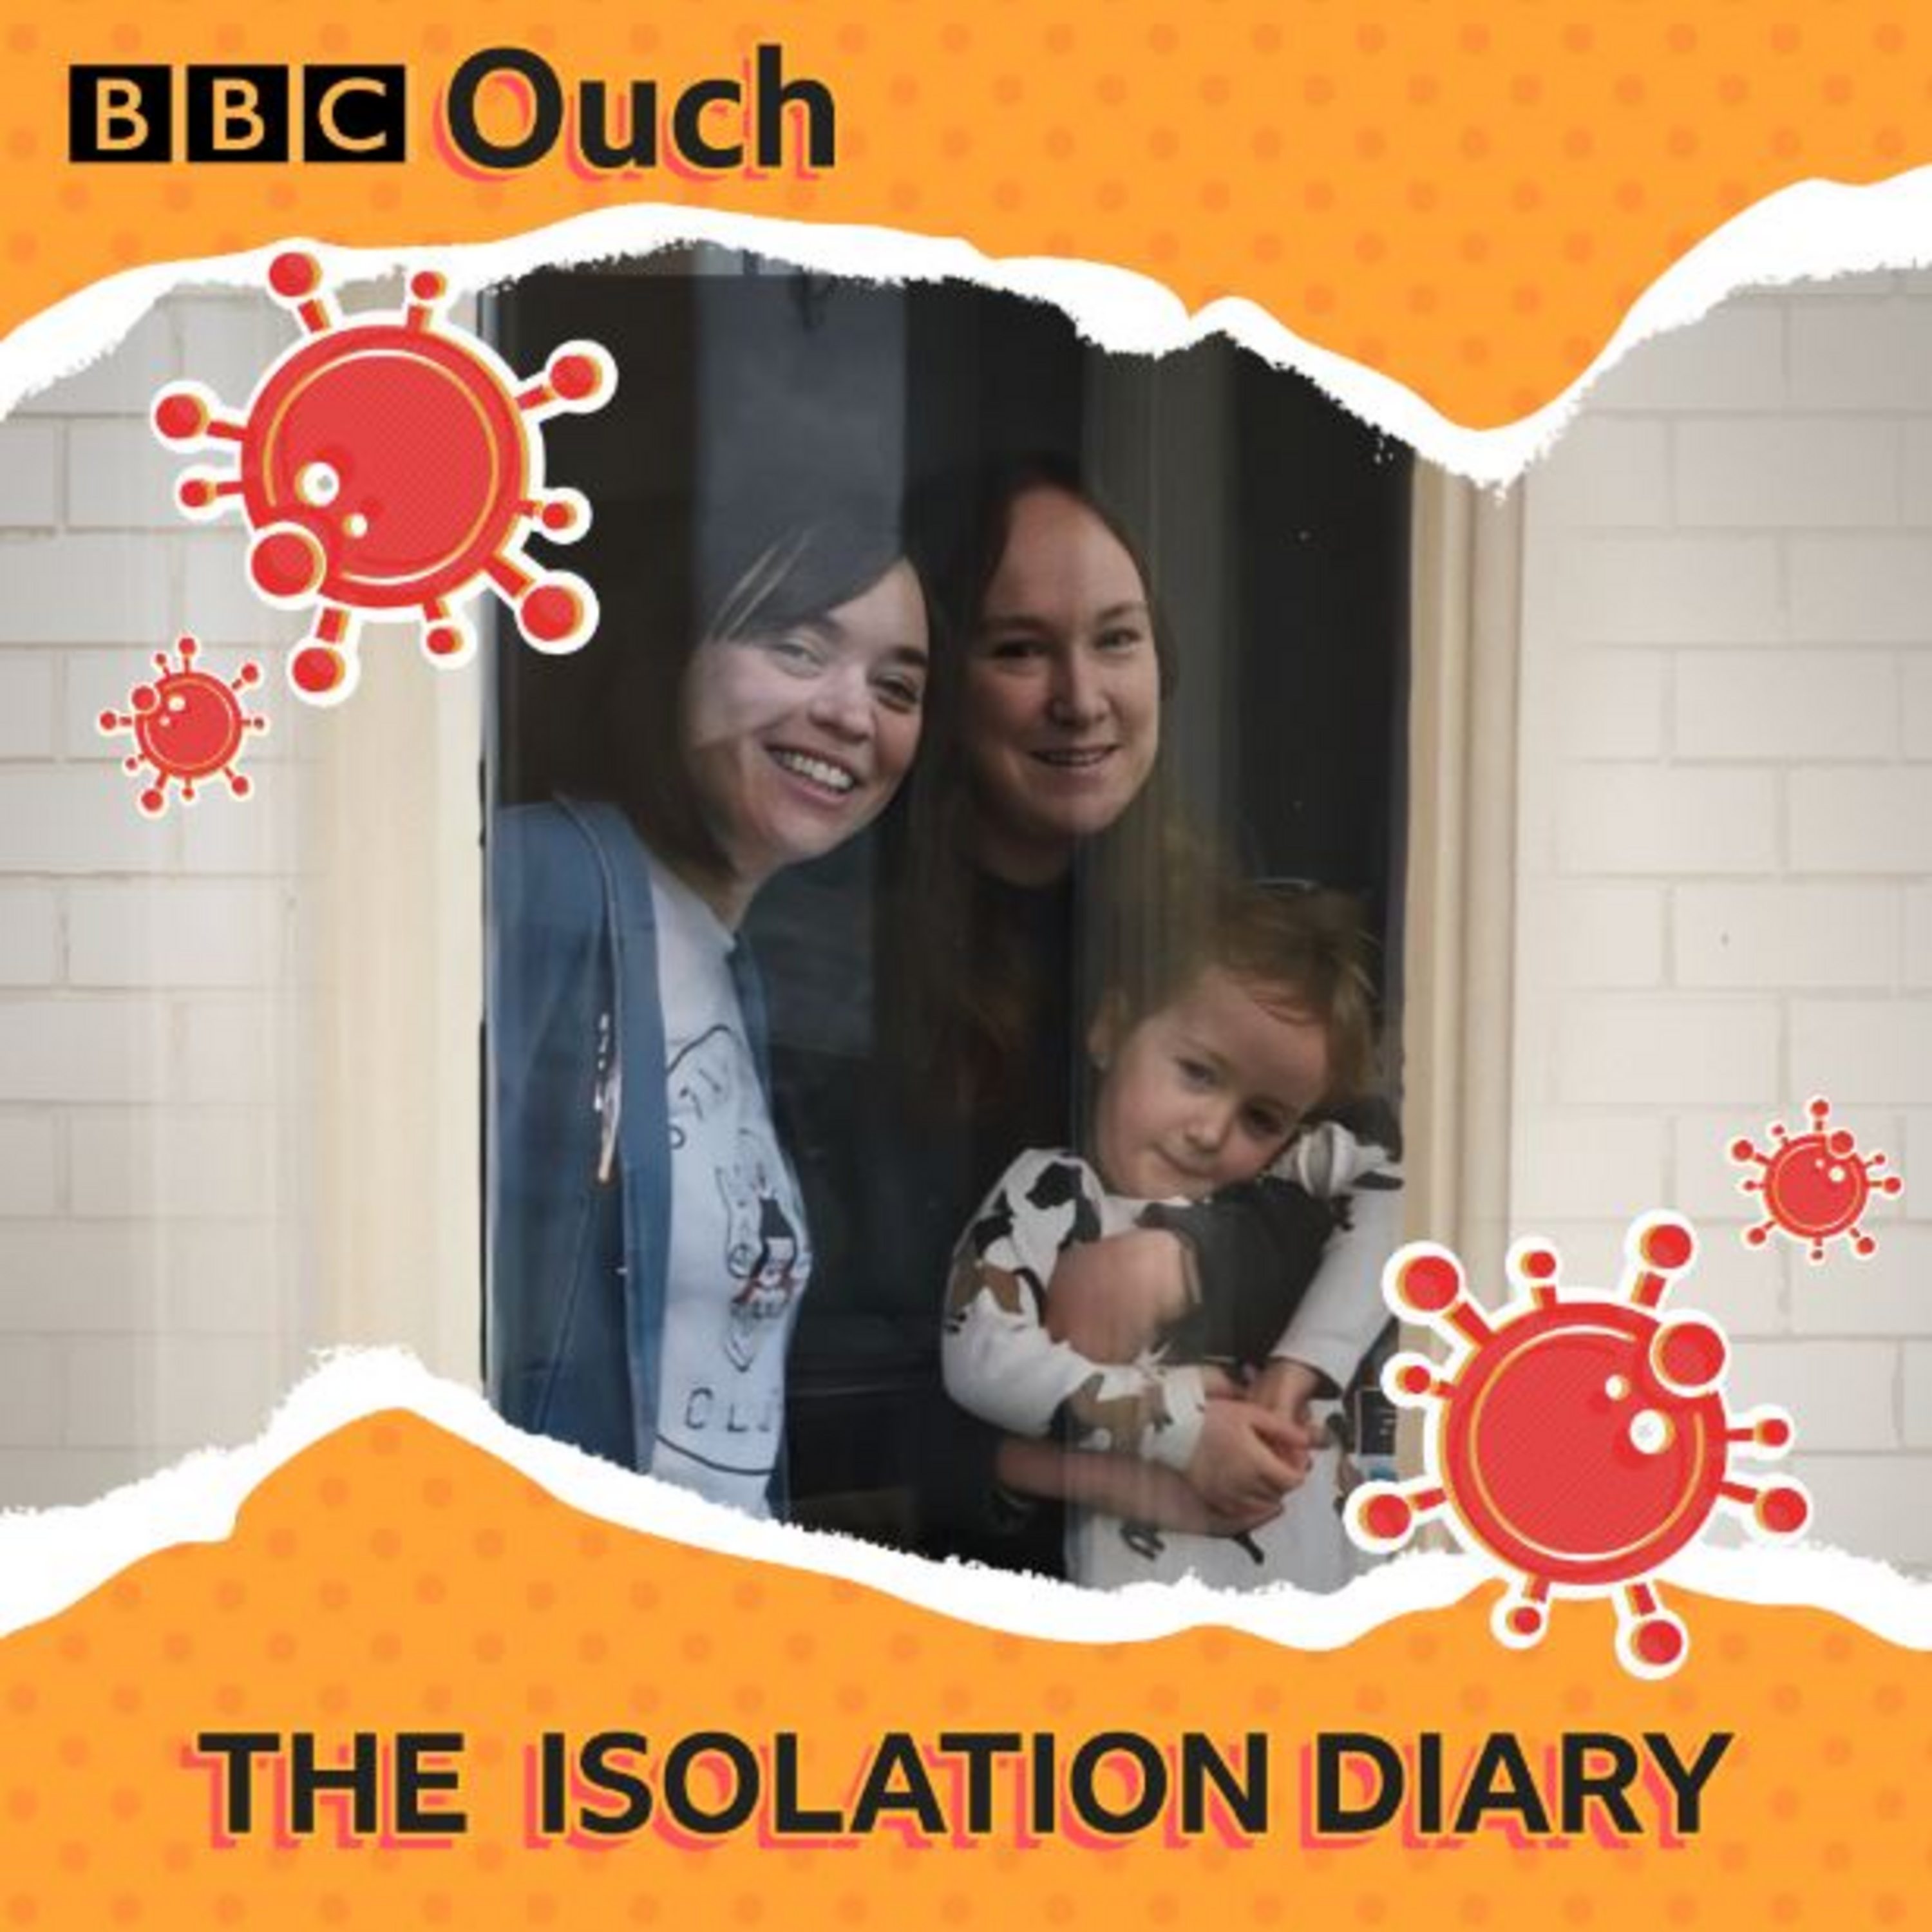 Kate and Holly’s isolation diary